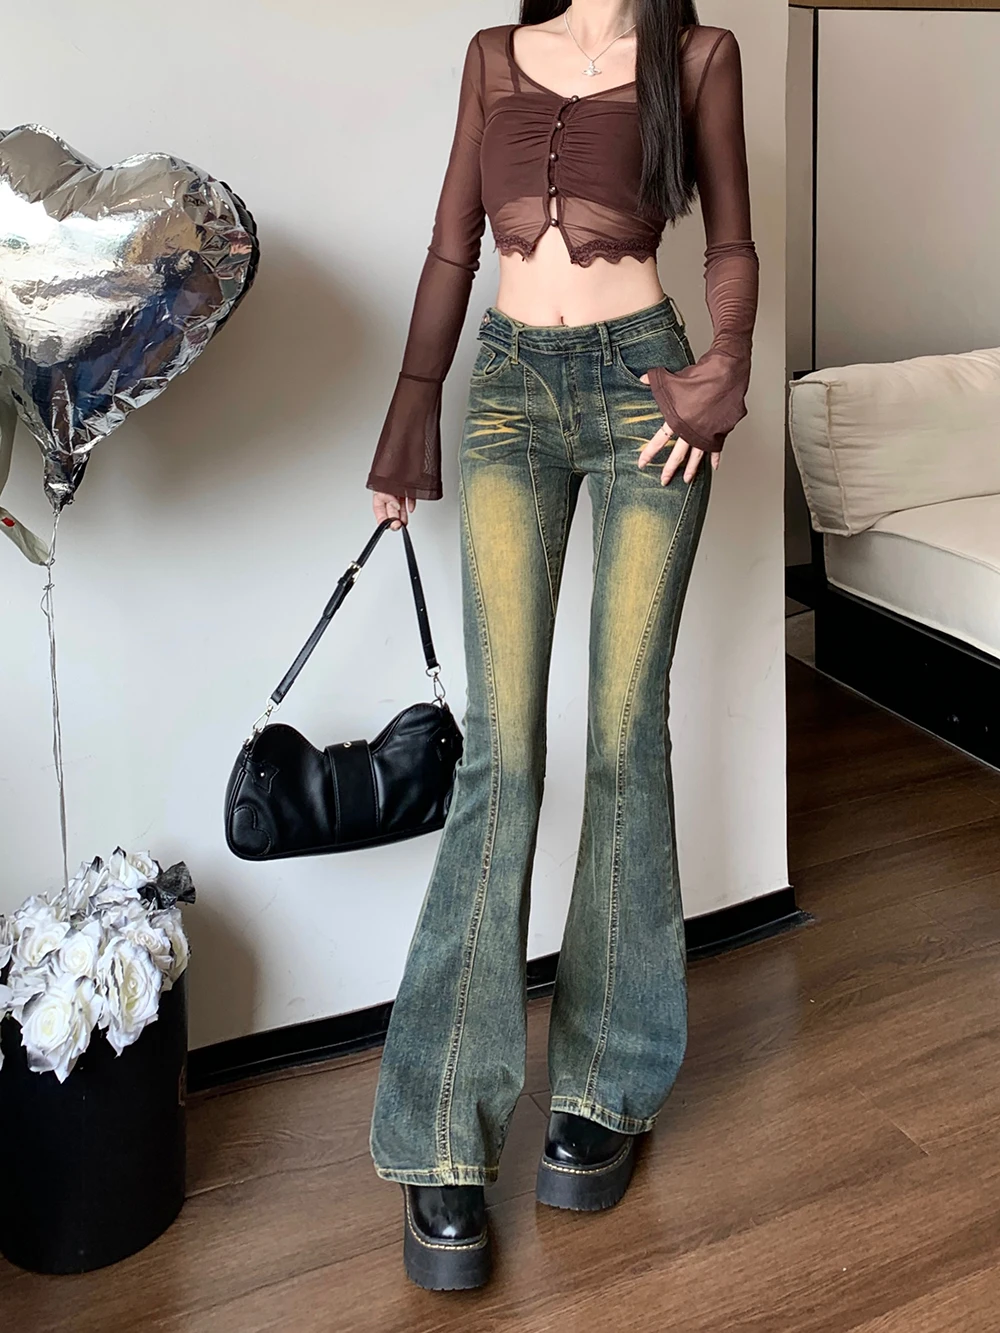 

Vintage Y2K Fashion Trends Sexy Street Girl Hot Chick Sense Of Design Low Waist Jeans Women's Pants Flared Trousers